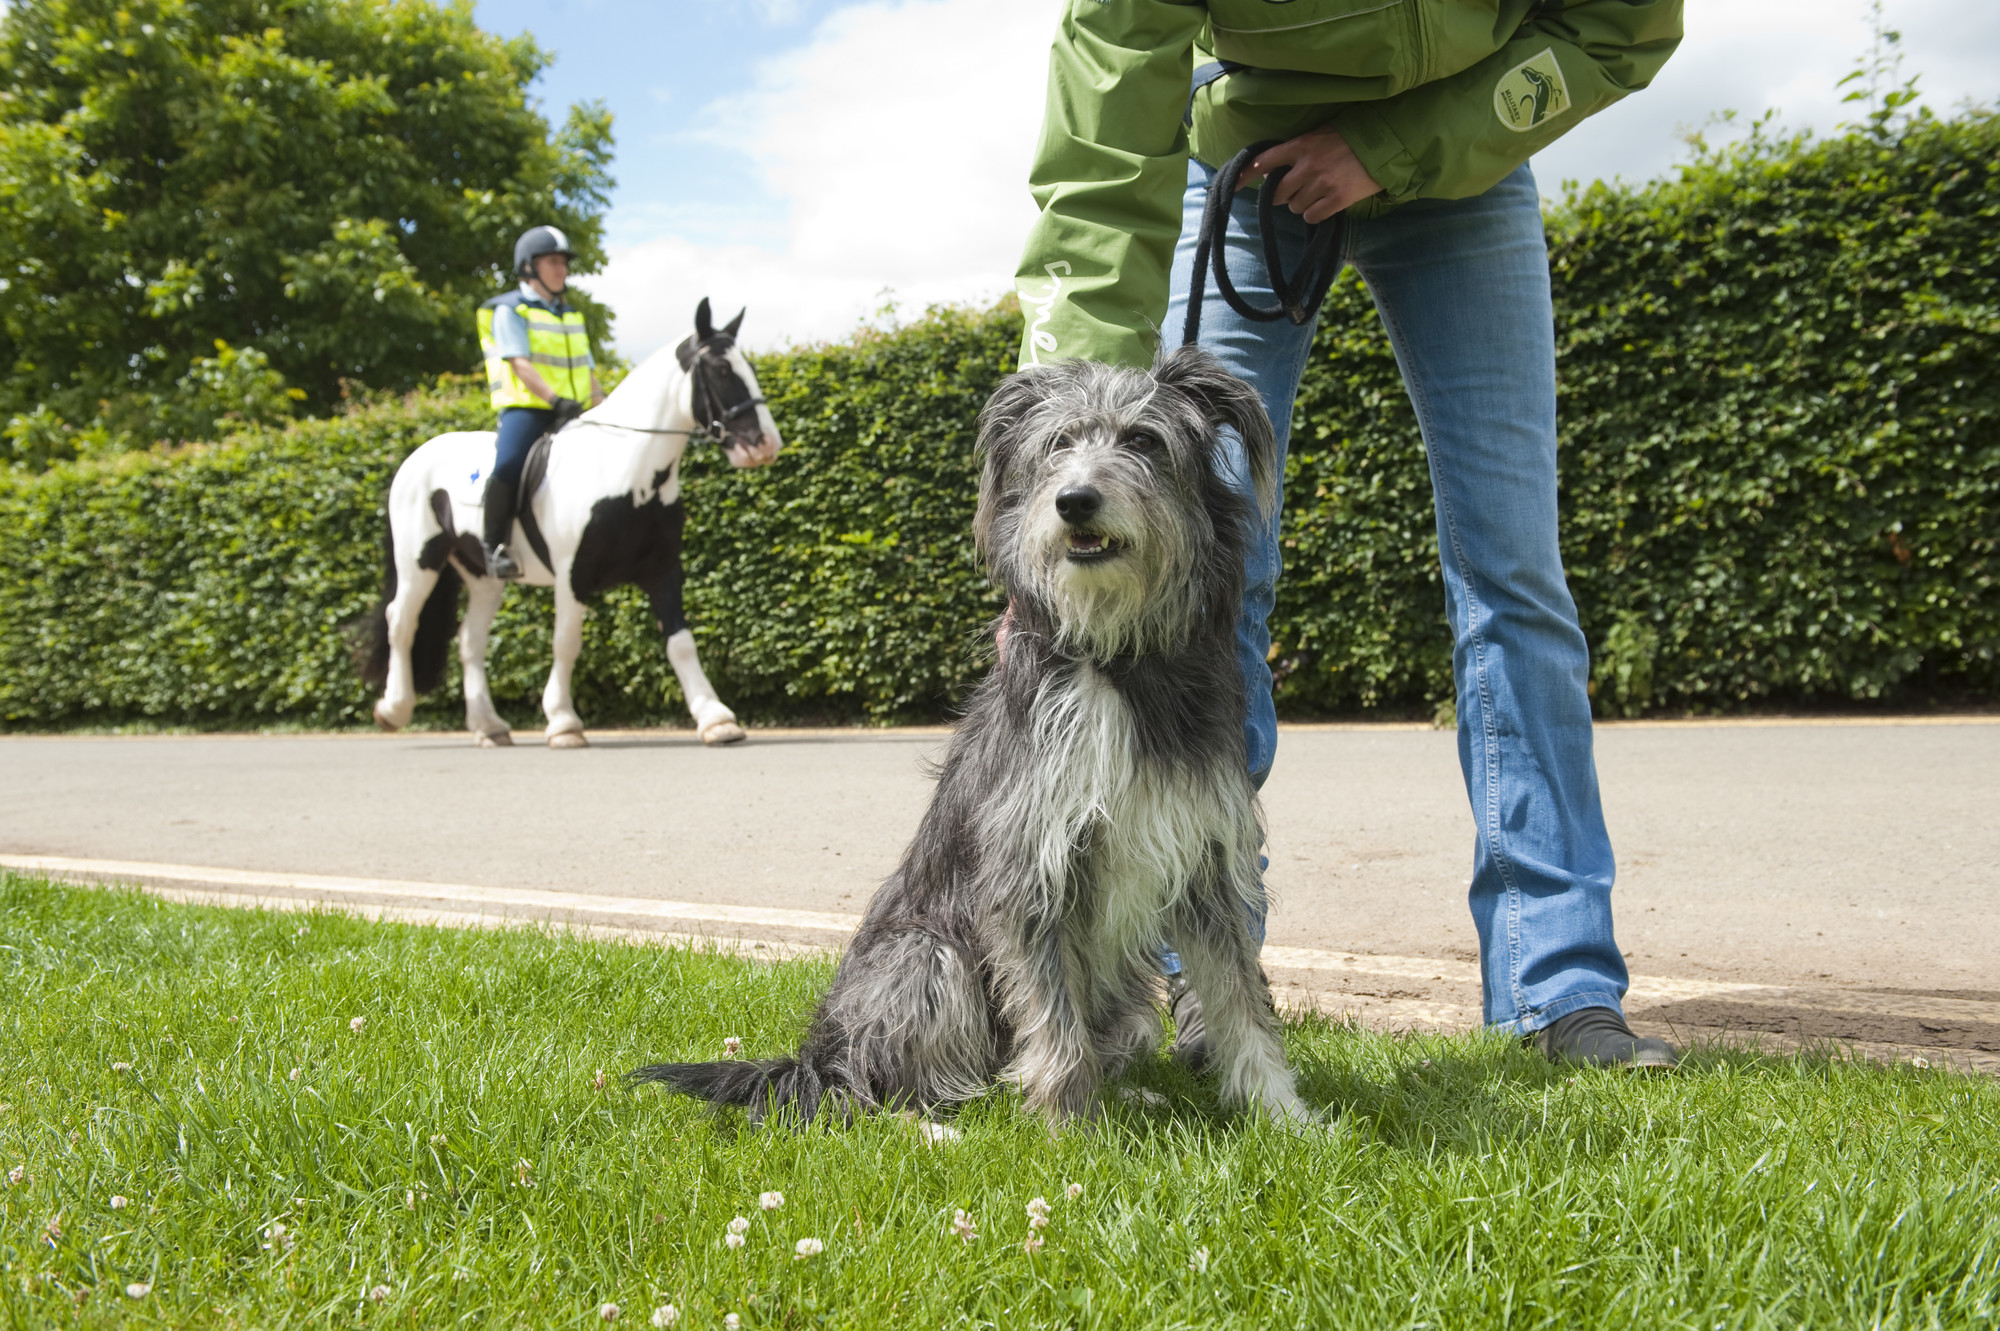 A grey dog sitting patiently with their owner, waiting for a brown and white horse and rider in a high vis vest to pass